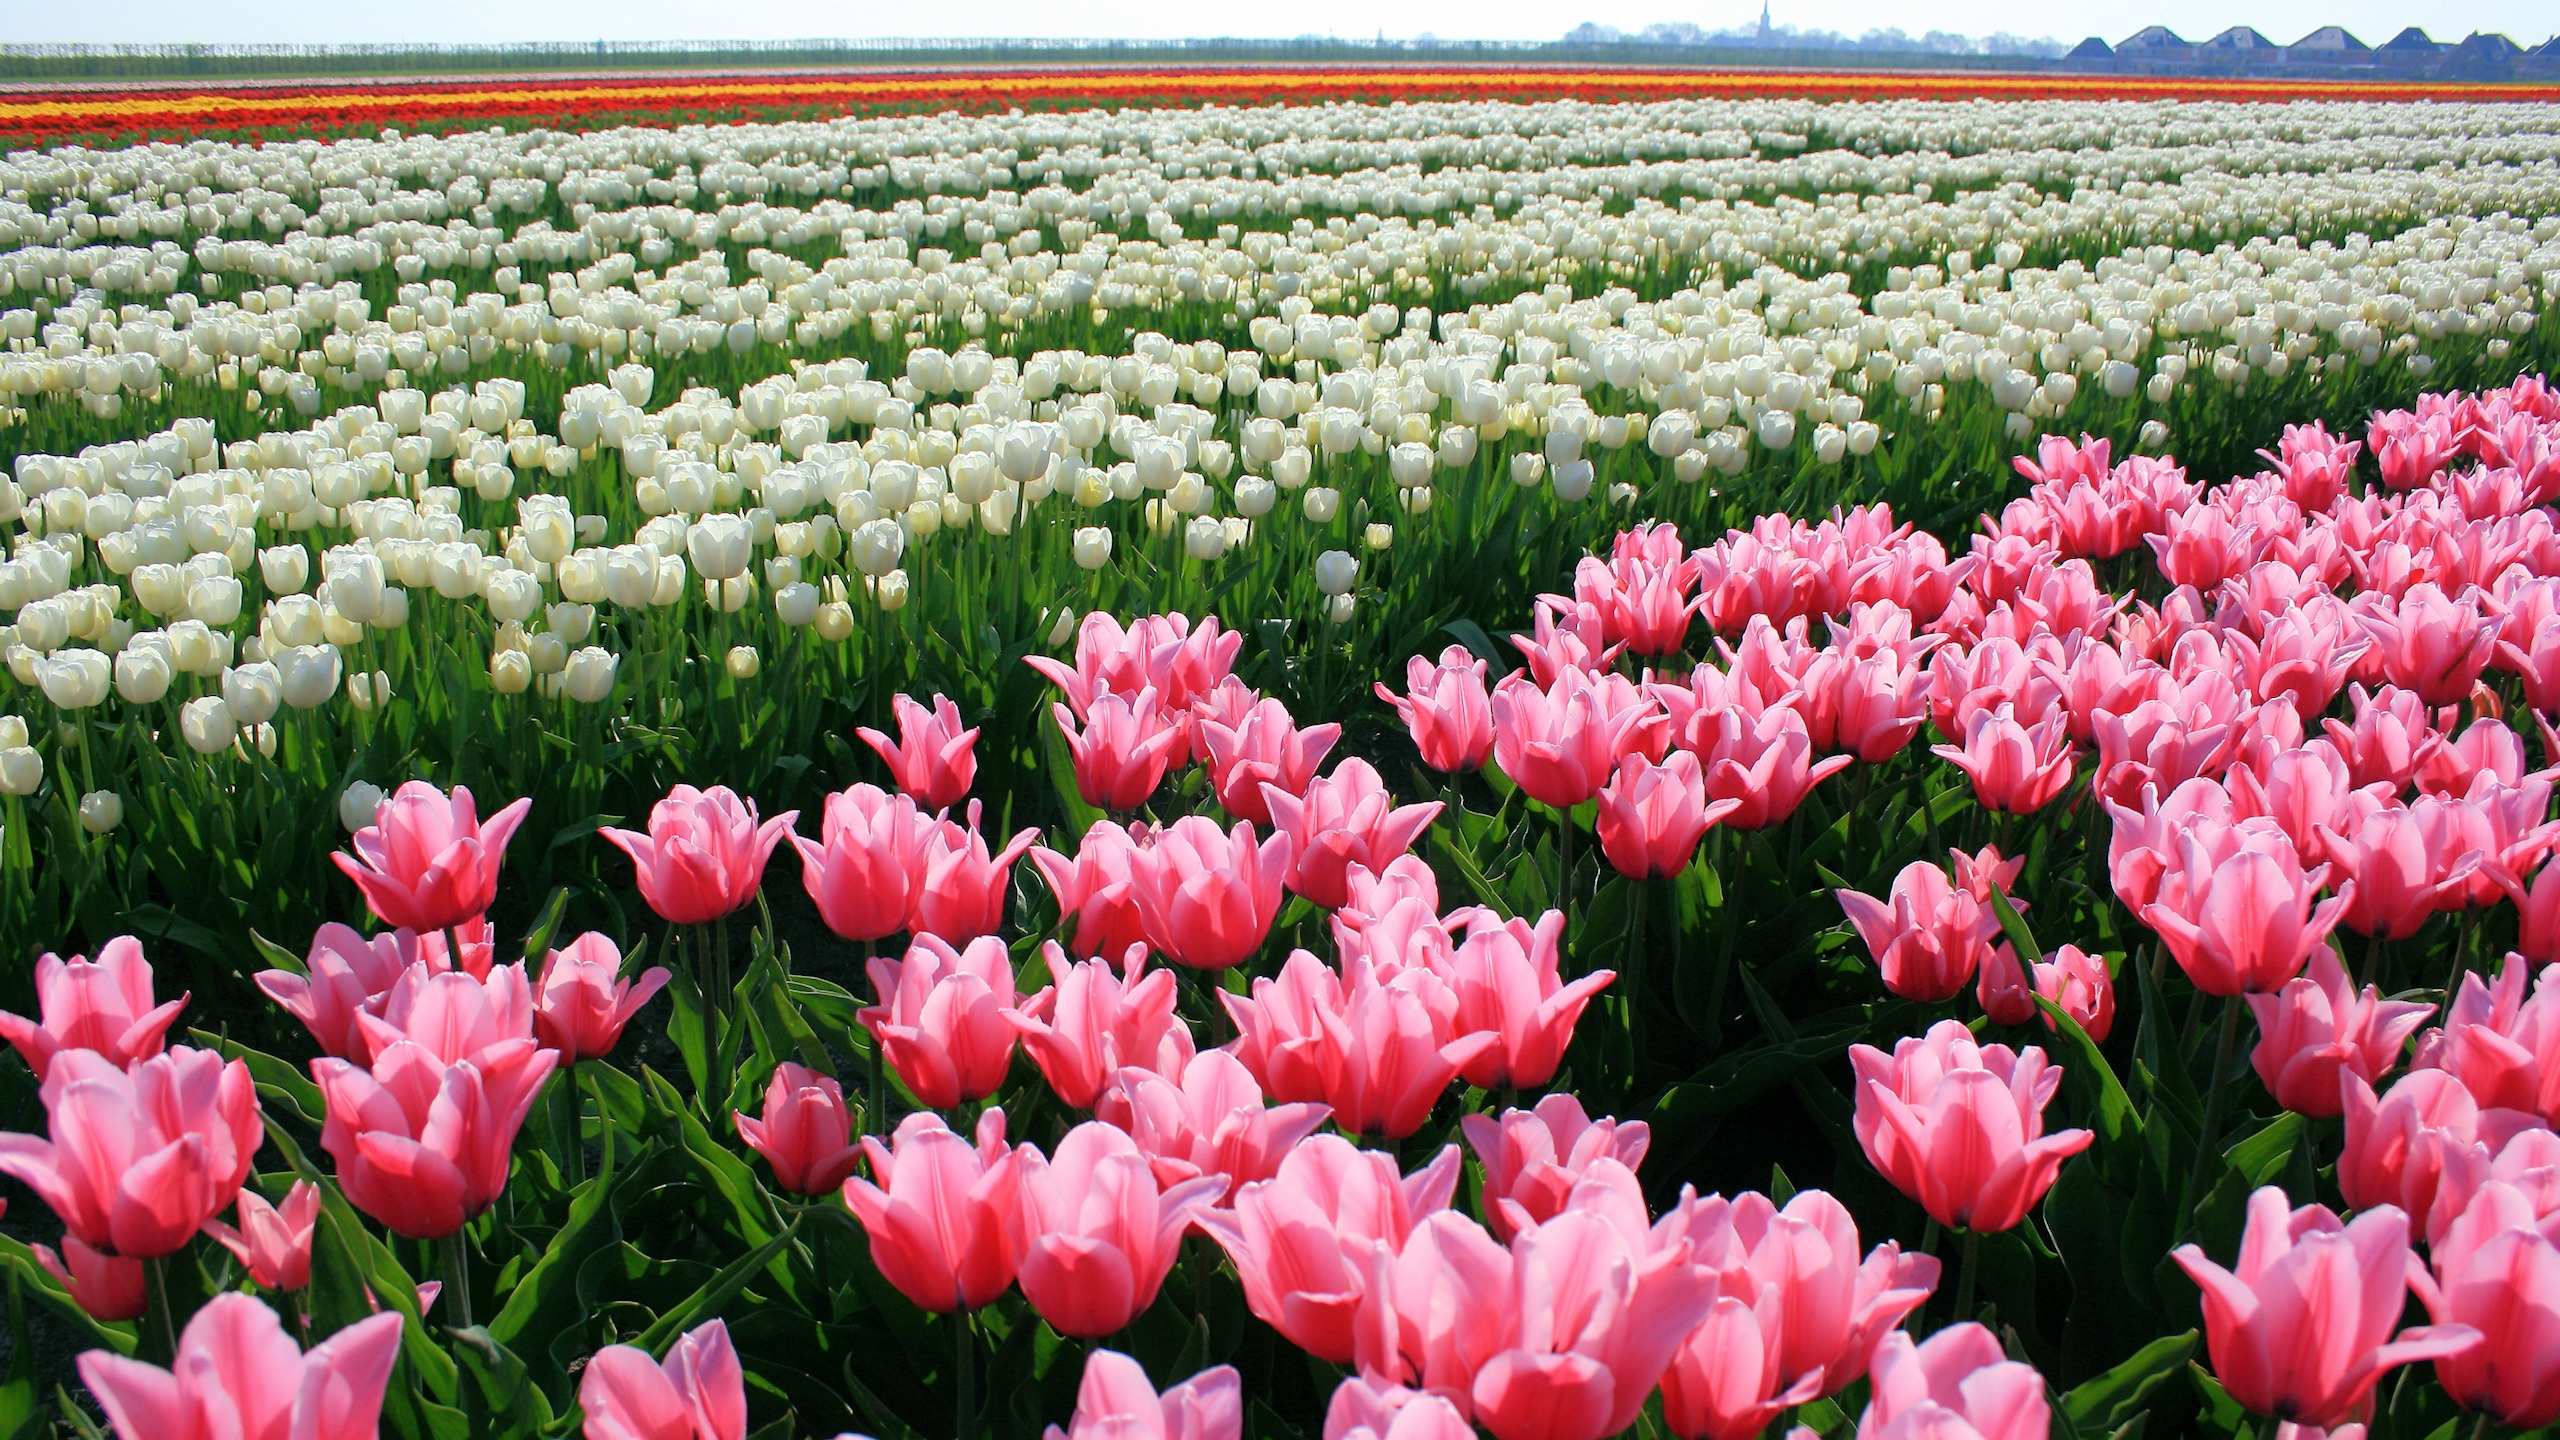 Tulips Field for 2560x1440 HDTV resolution